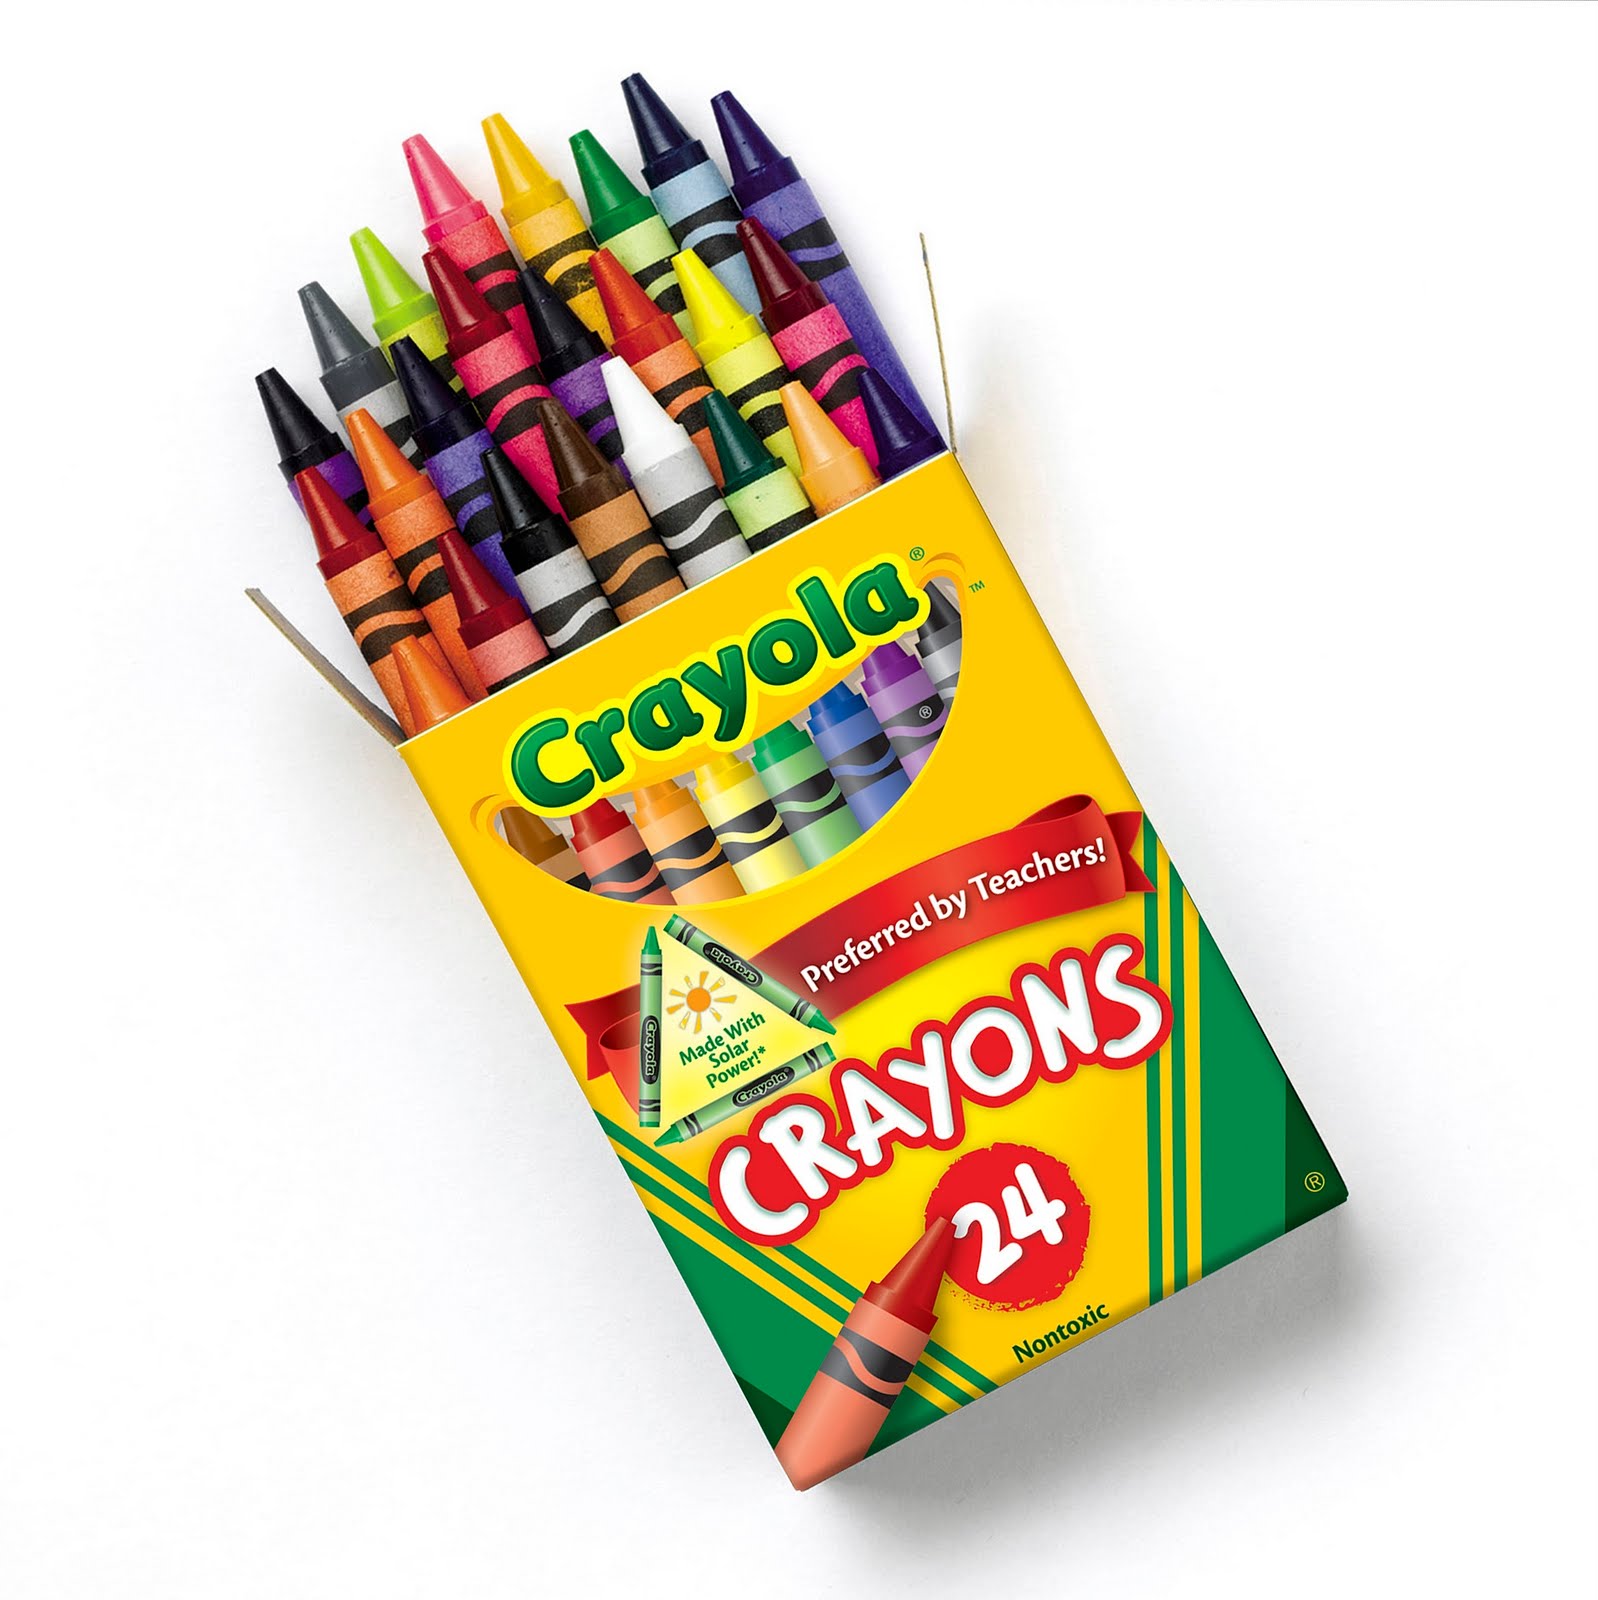 crayon clipart packet